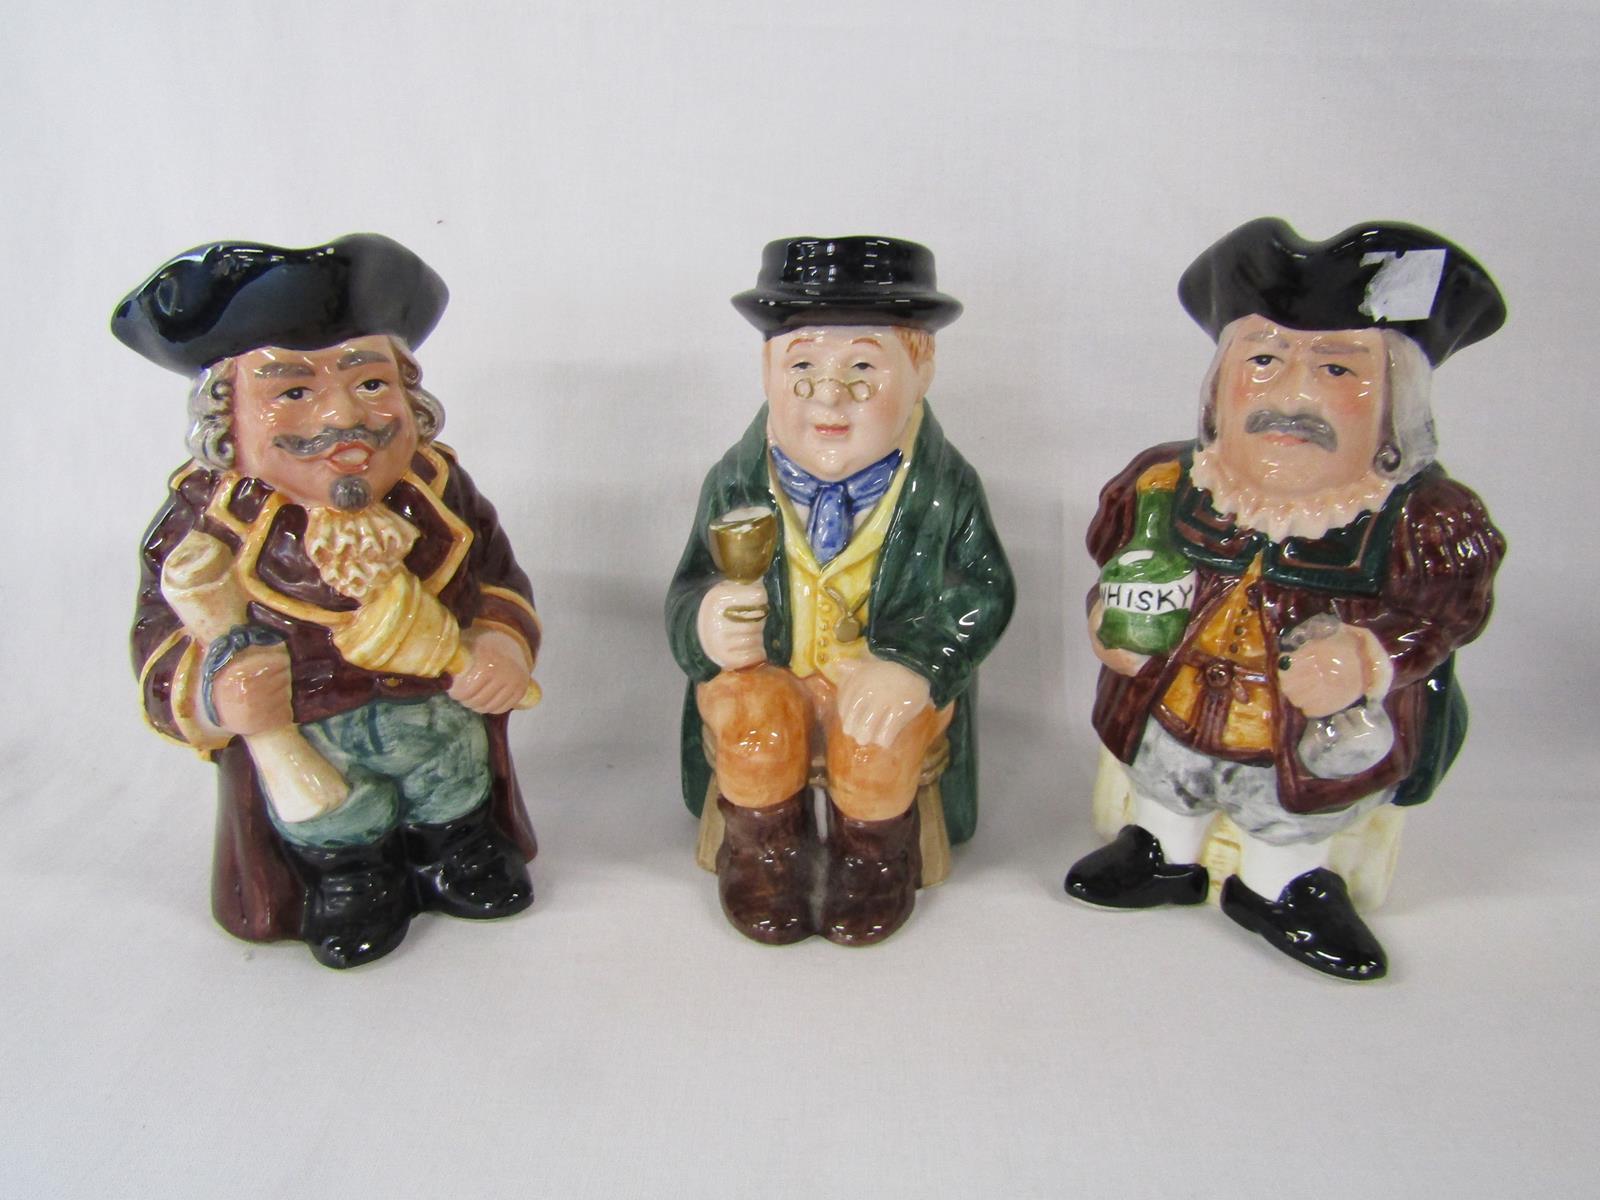 14 character & toby jugs includes town crier, Kelsbro Ware 'Mr Pickwick', Royal Doulton miniature, - Image 2 of 6